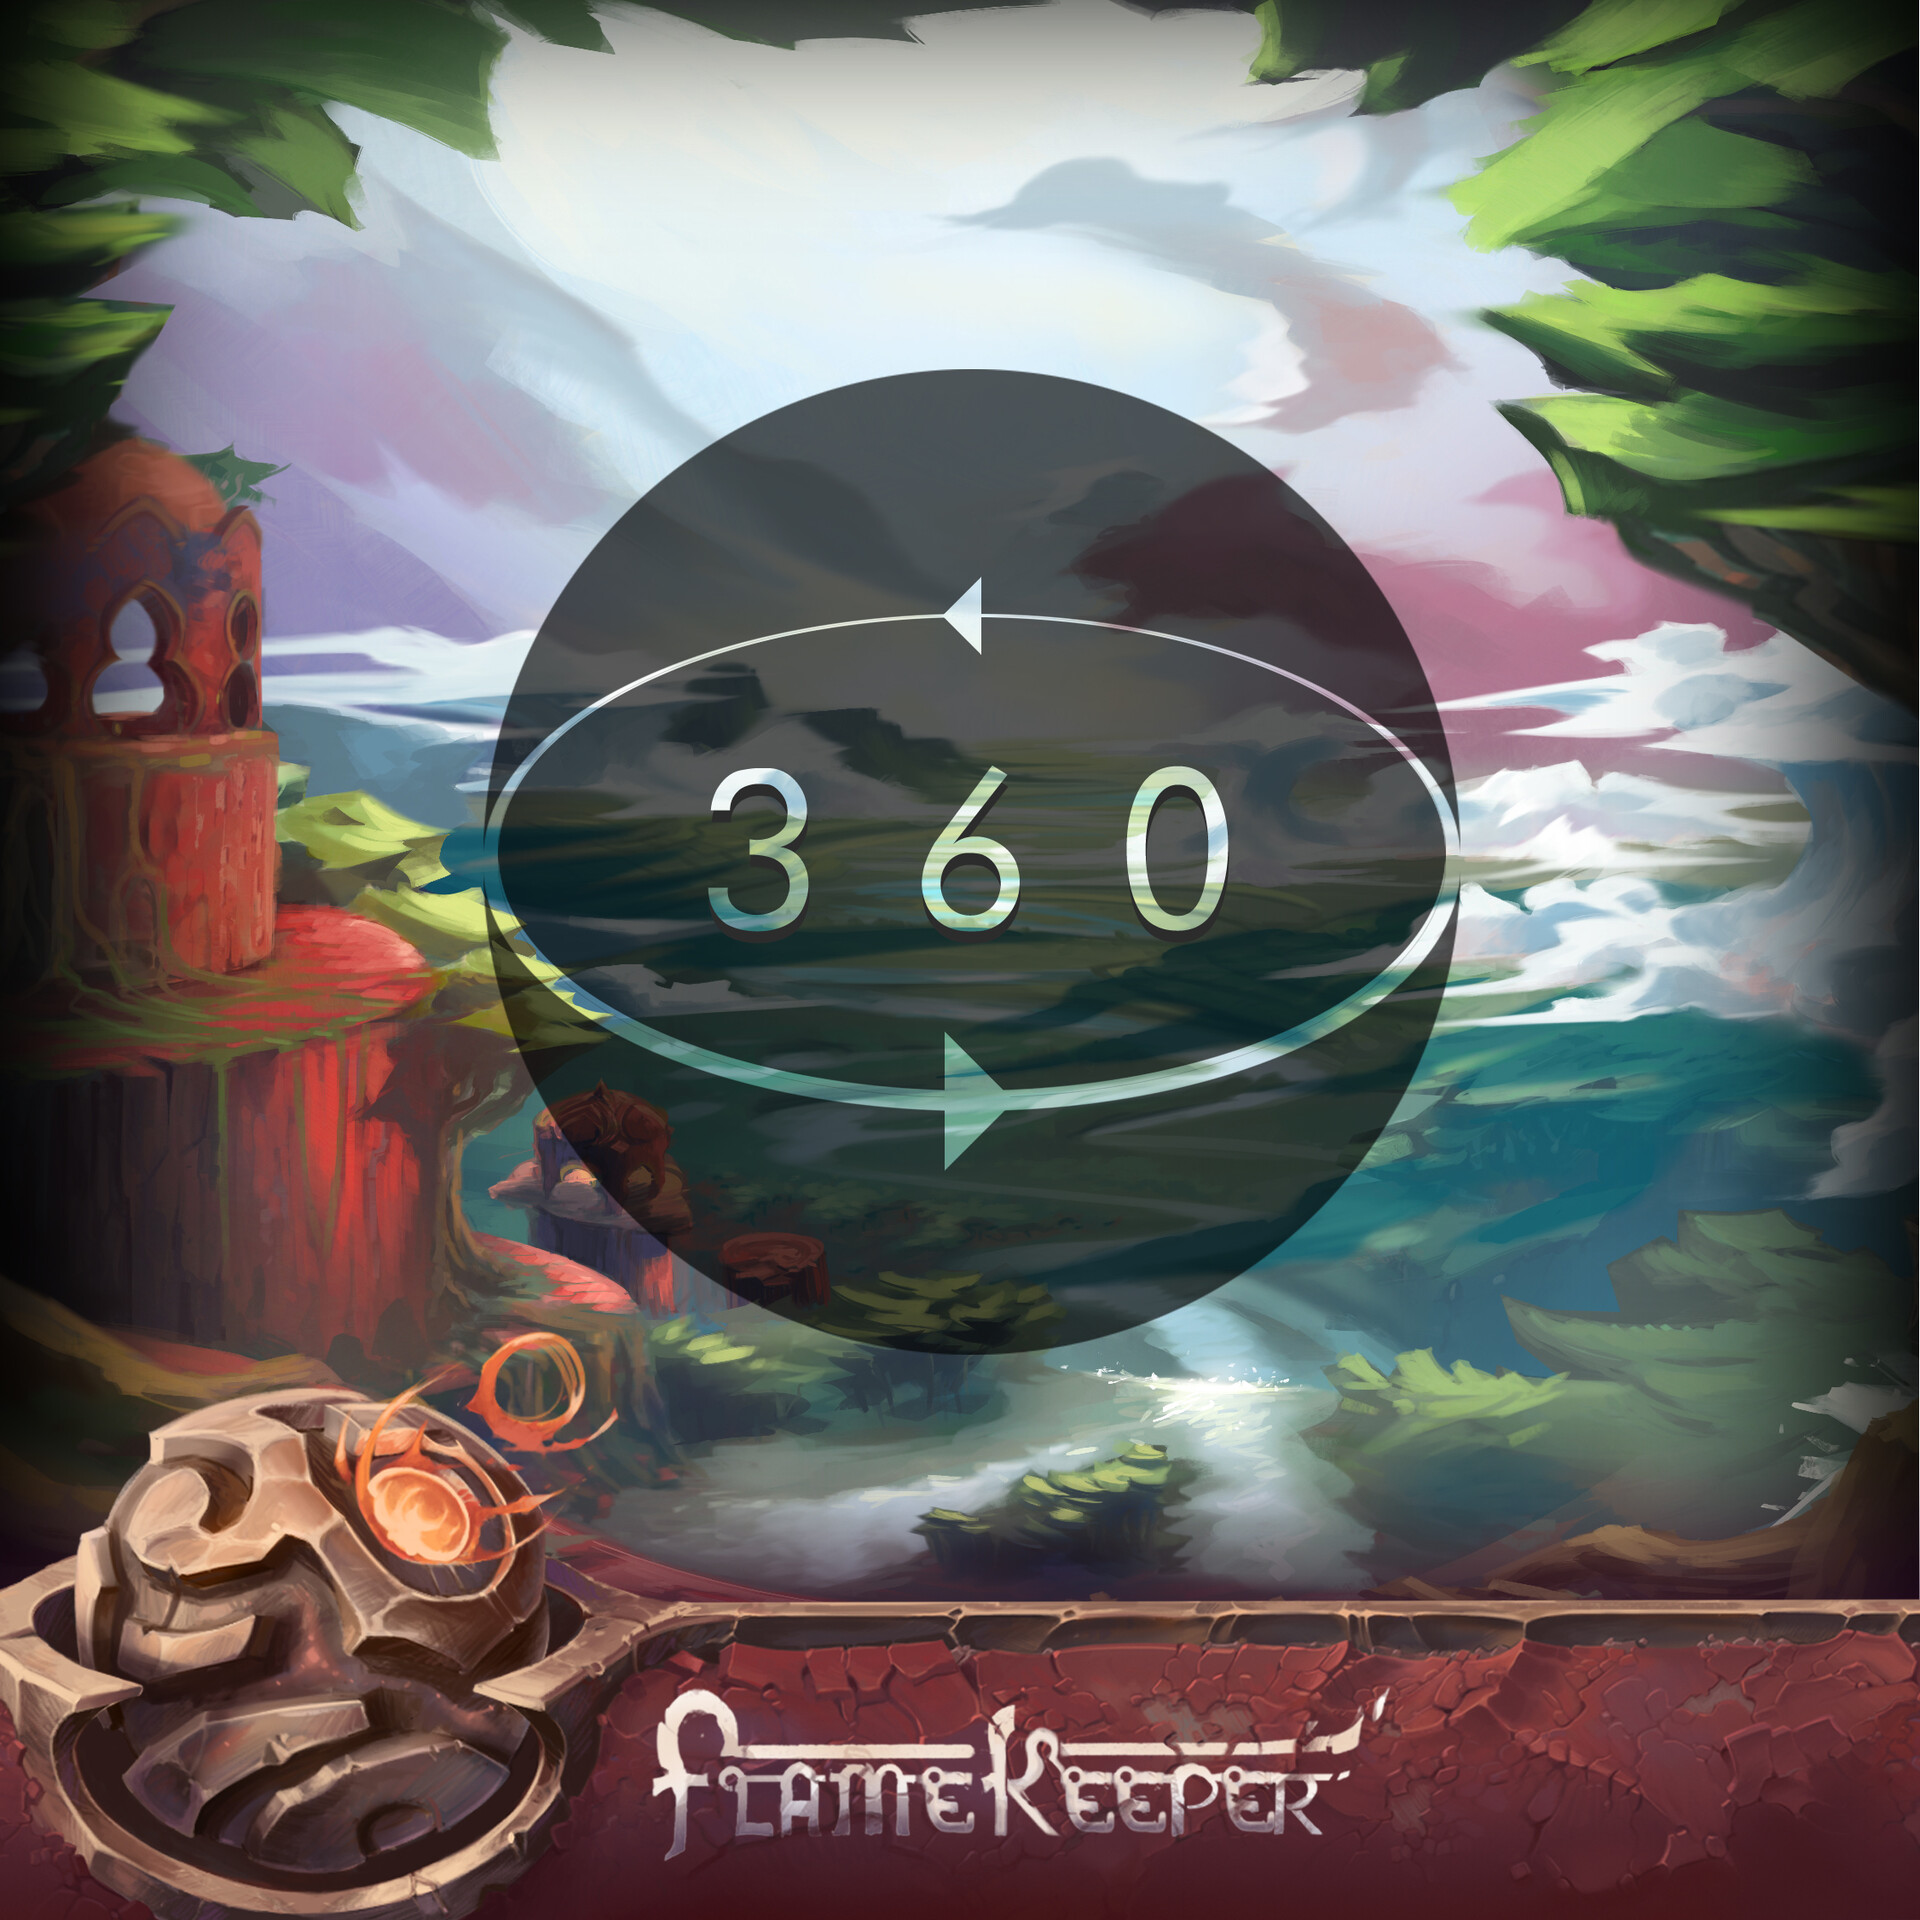 Flame Keeper download the last version for windows